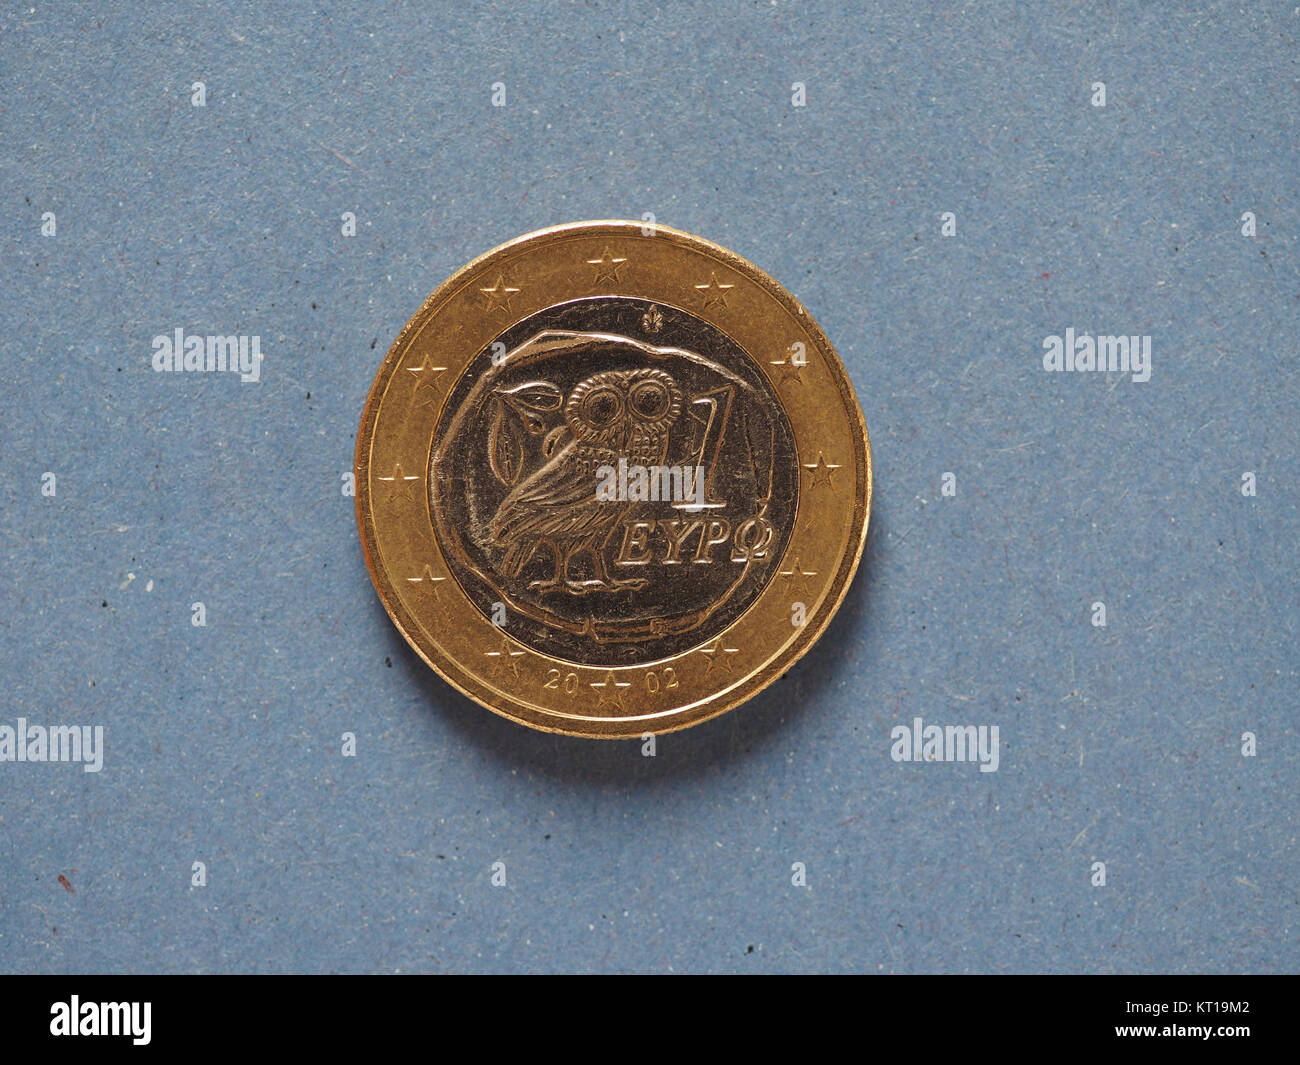 Image of 1 Euro Coin, European Union, Netherlands Over Blue-GQ881345-Picxy